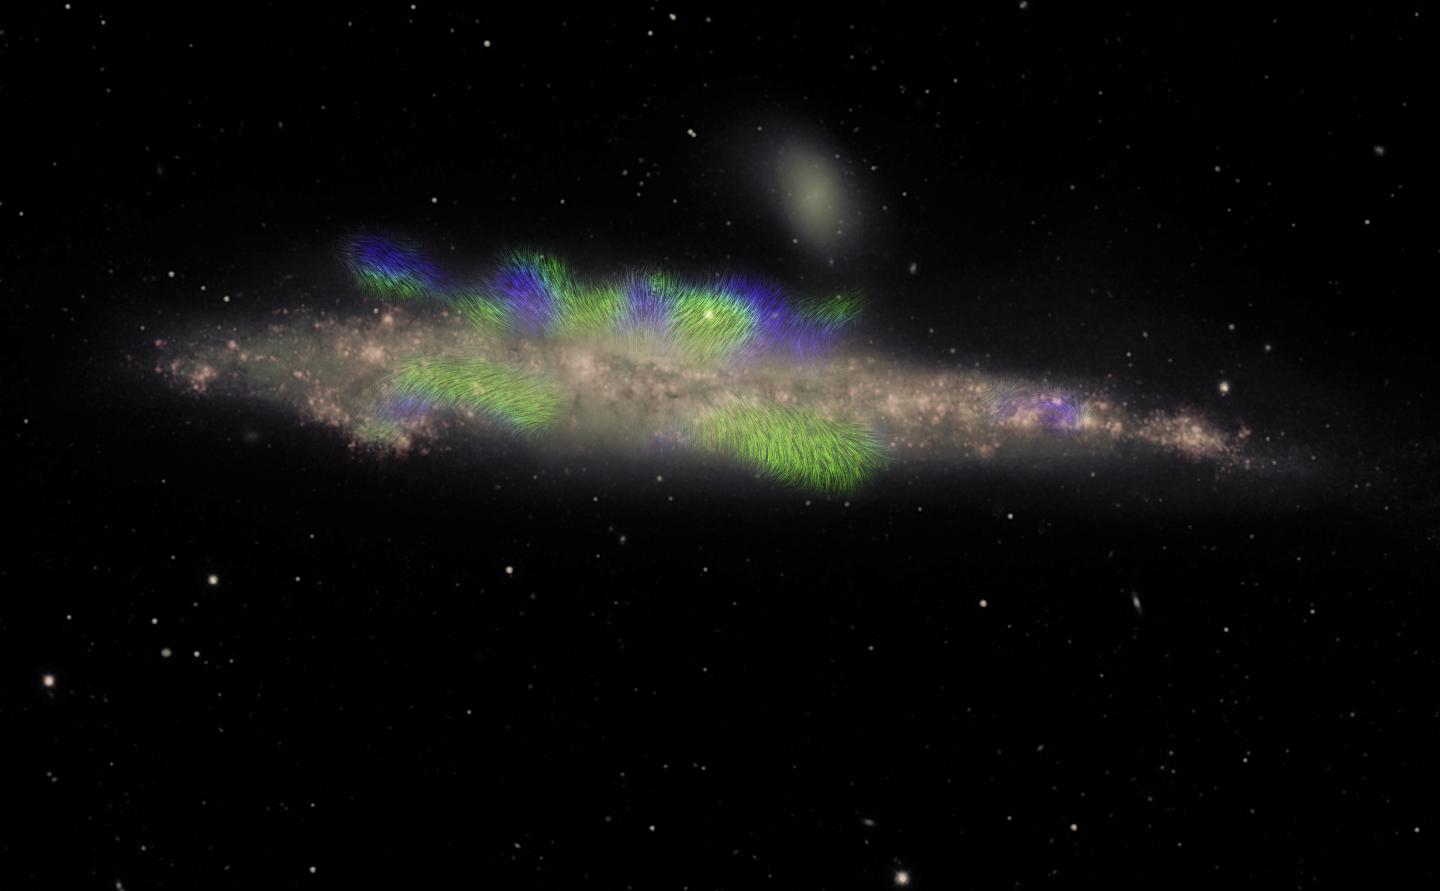 The Whale Galaxy, NGC 4631